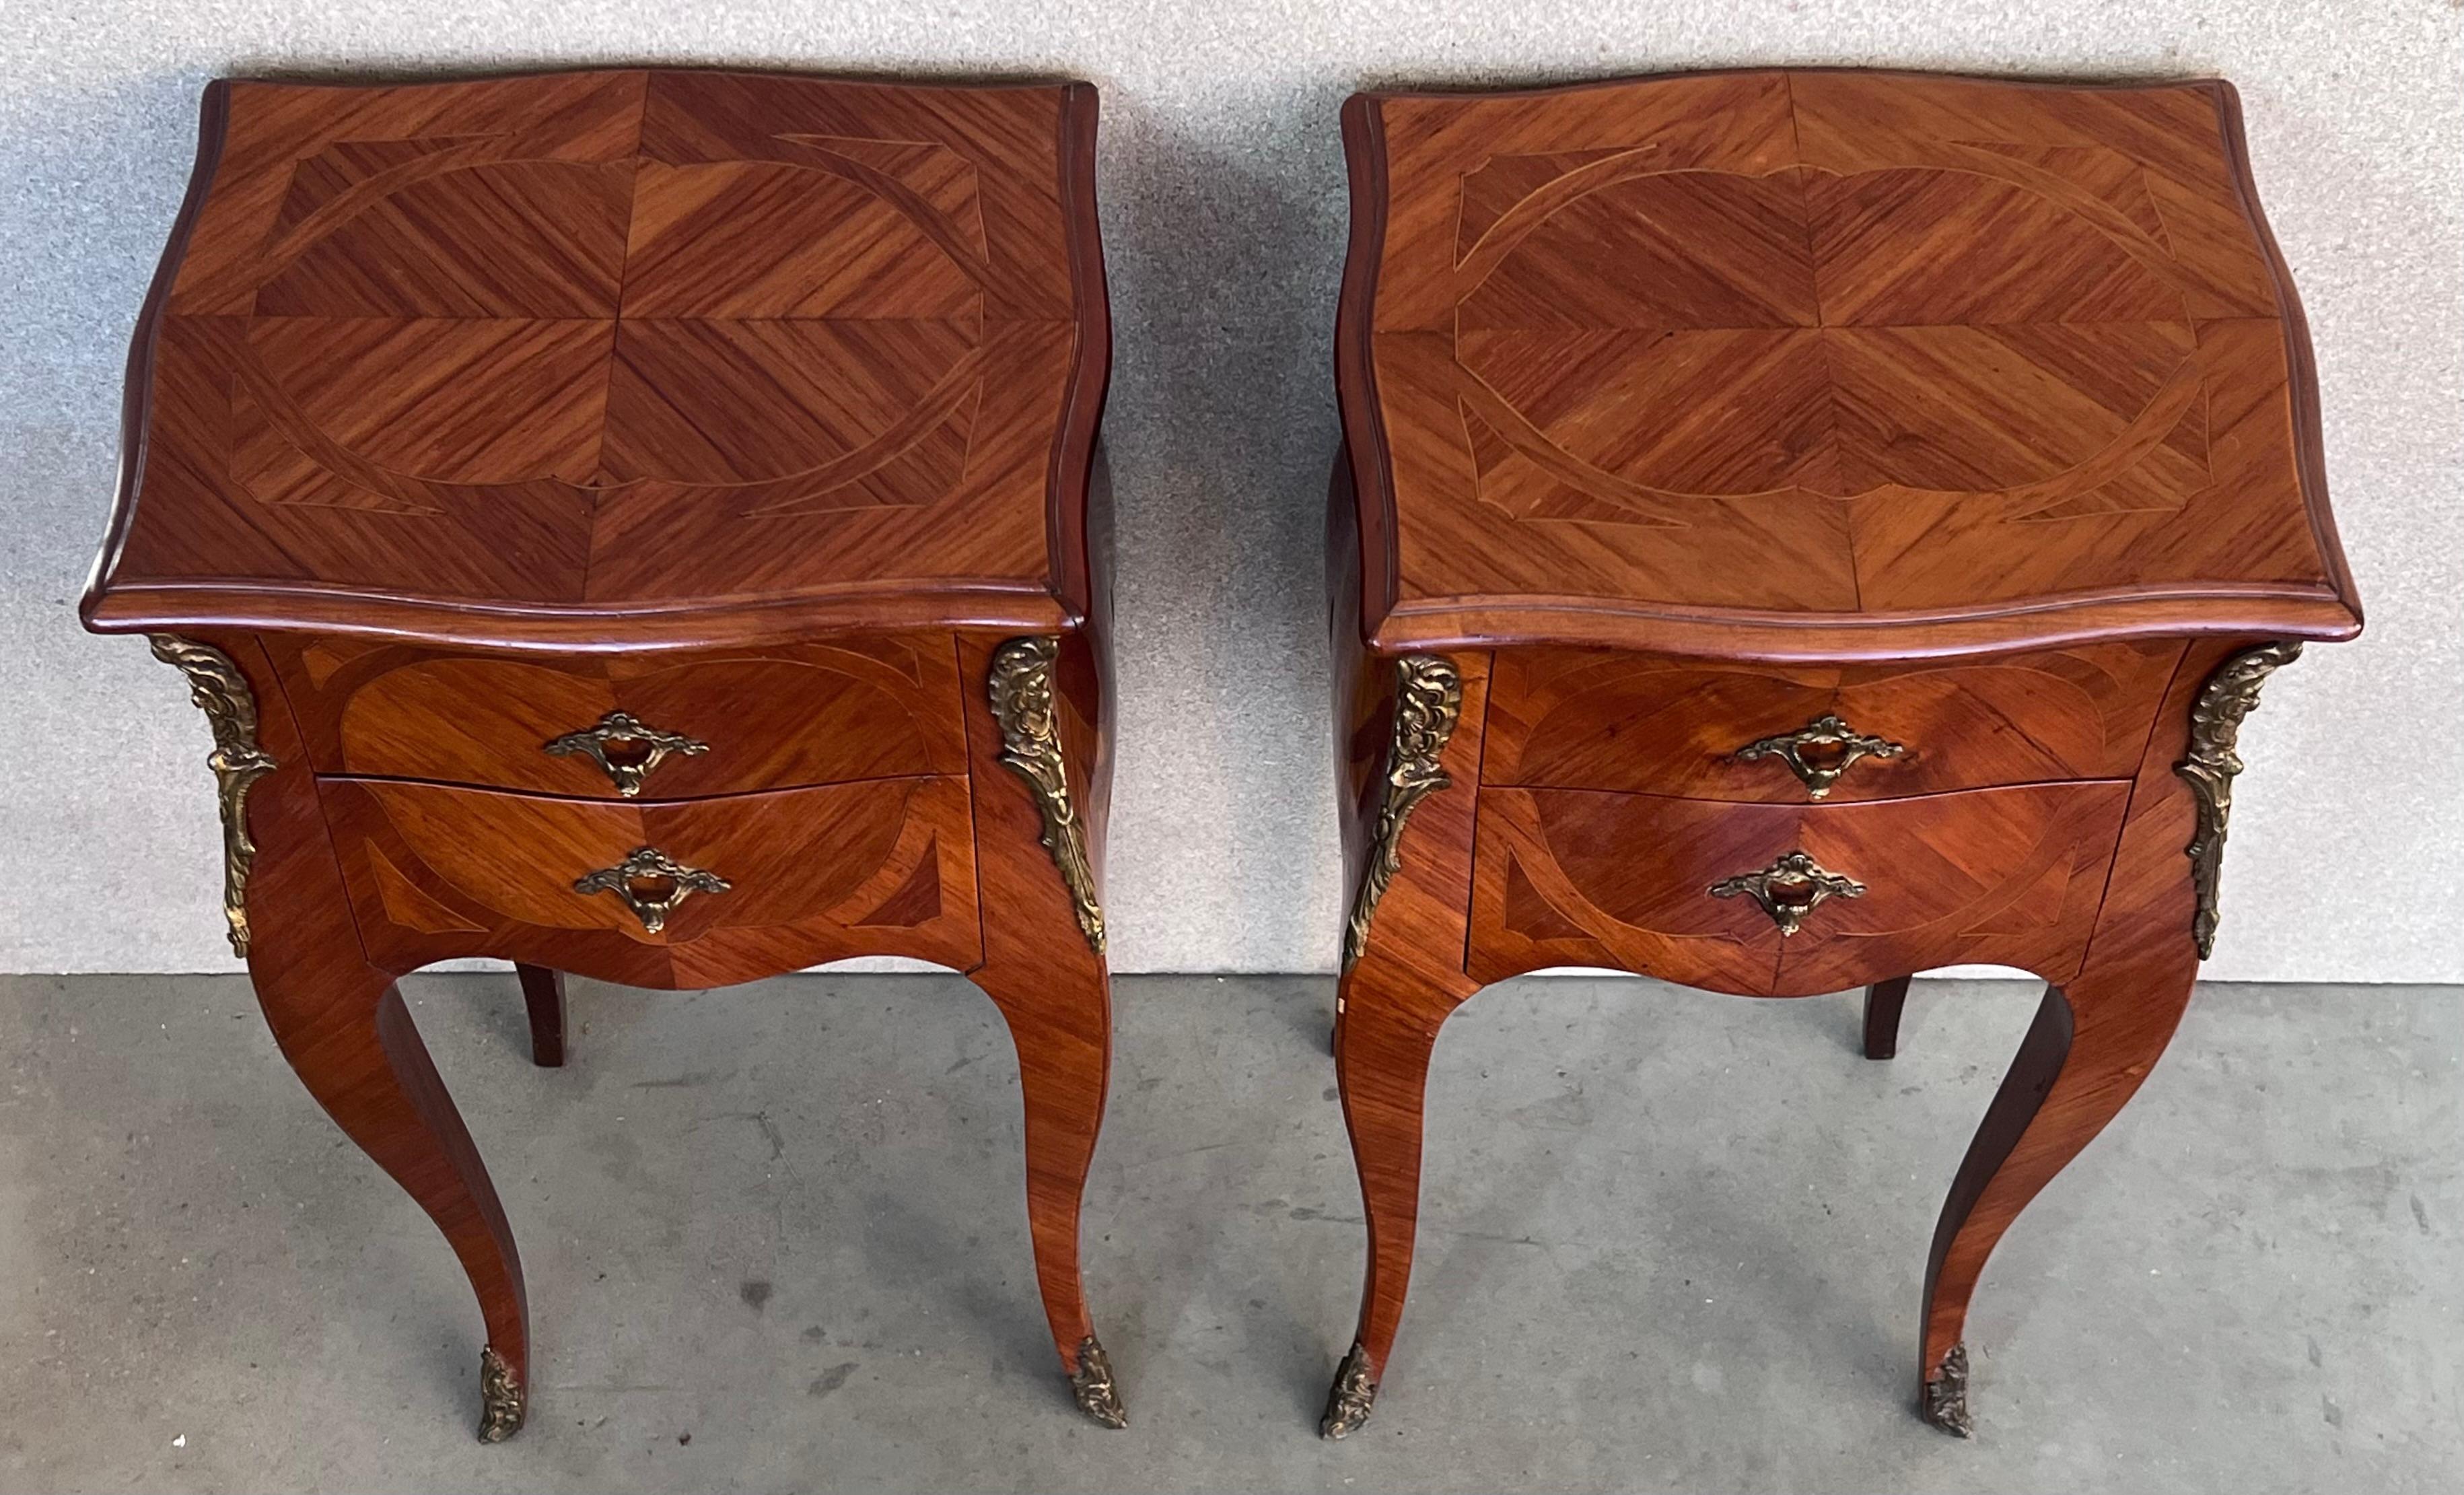 French Provincial Antique Louis XV French Marquetry with Drawers Nightstands, Set of 2 For Sale